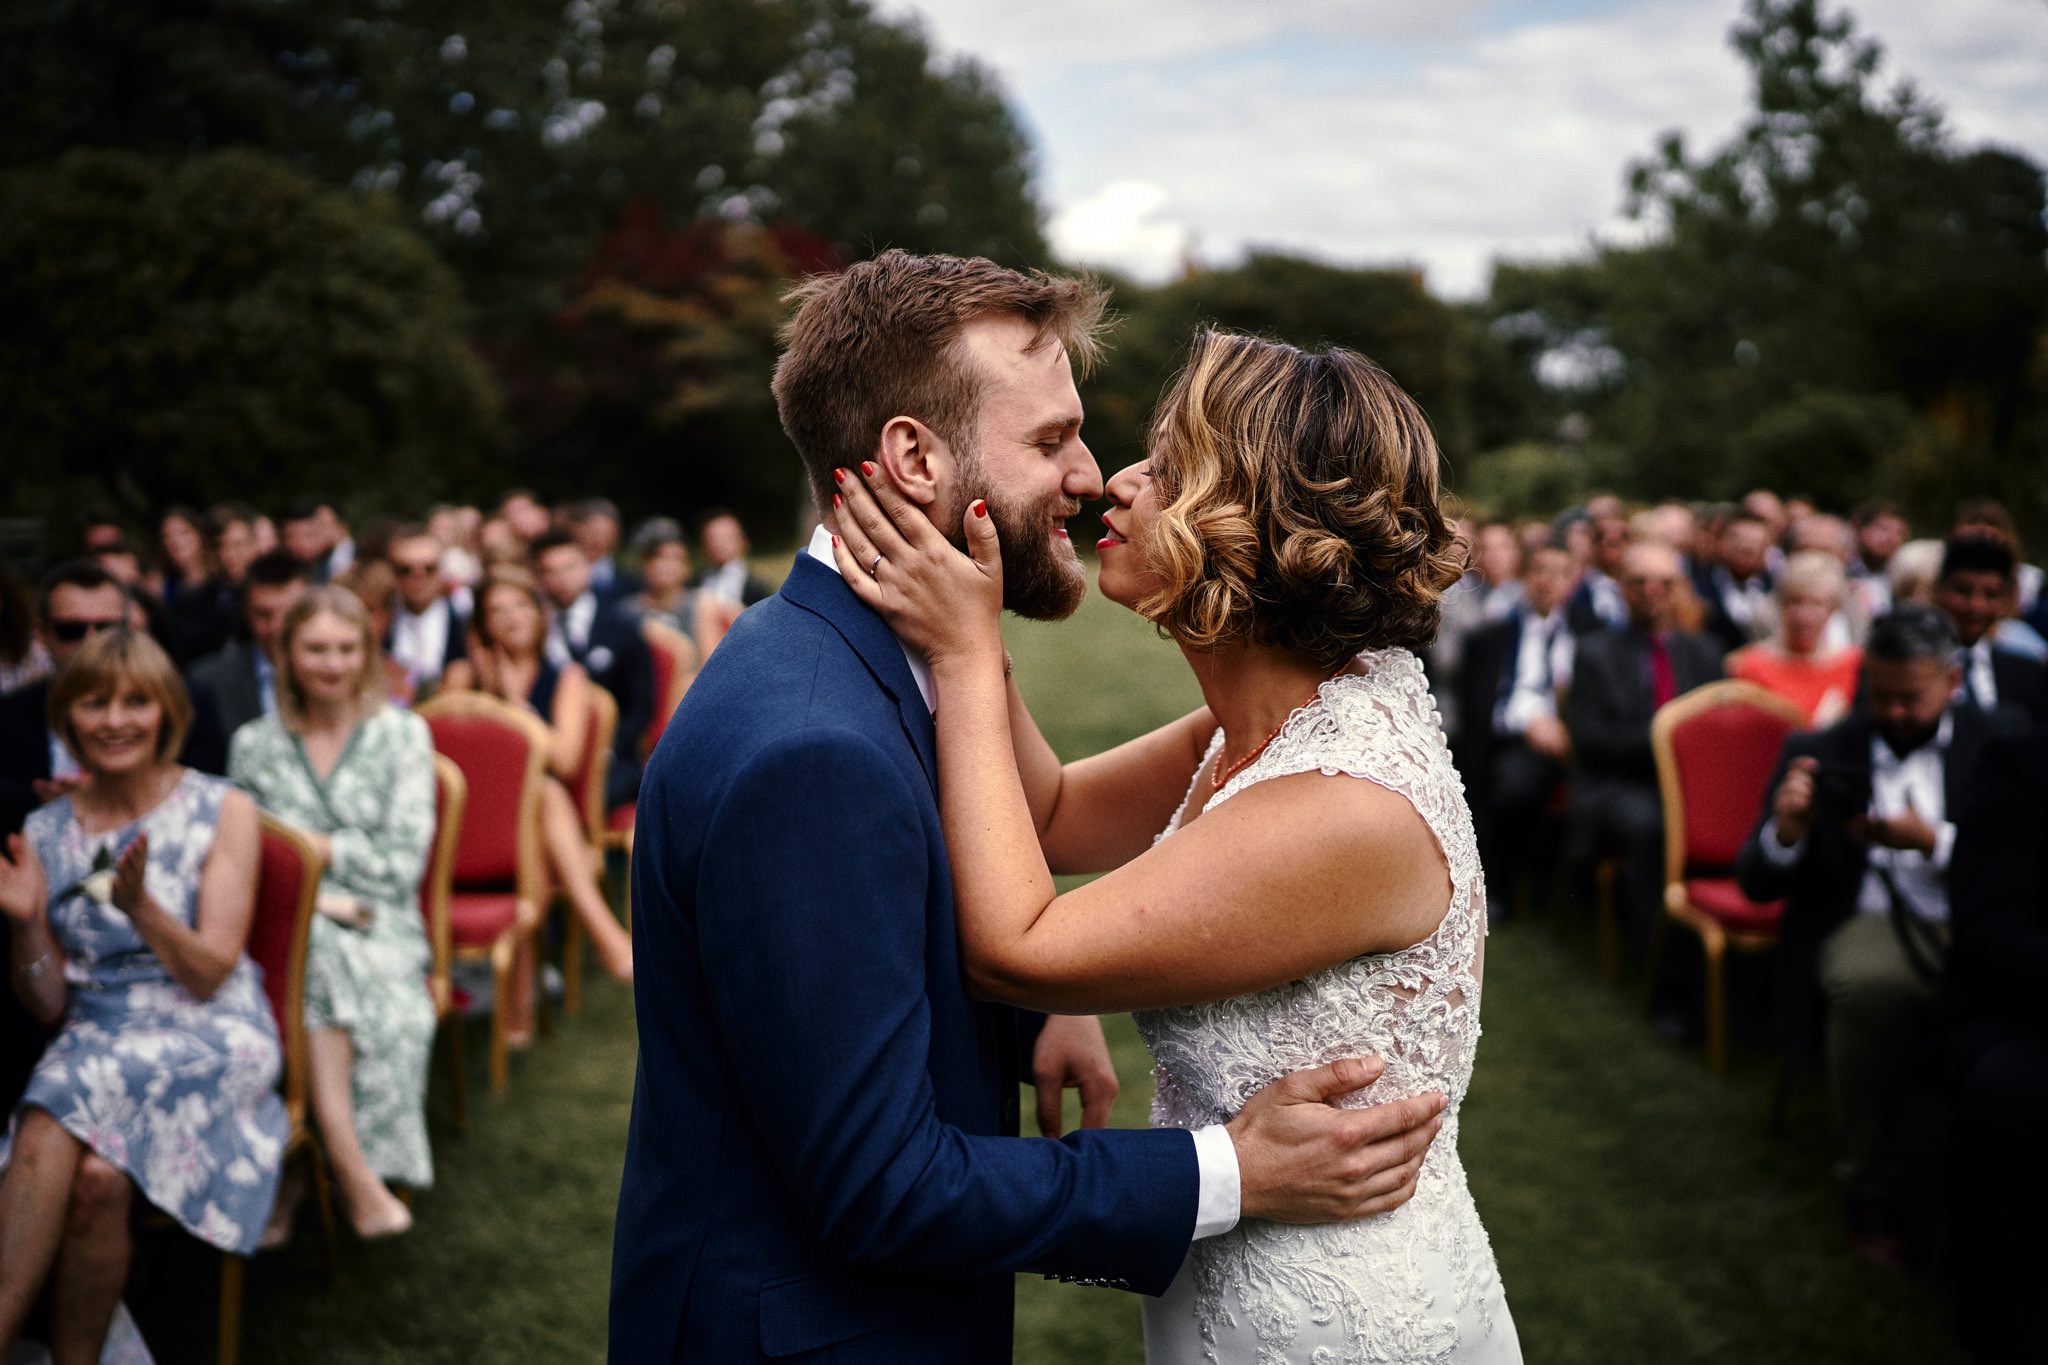 Bride and groom's first kiss during their wedding ceremony in the beautiful gardens at Walcott Hall Hotel, Shropshire.